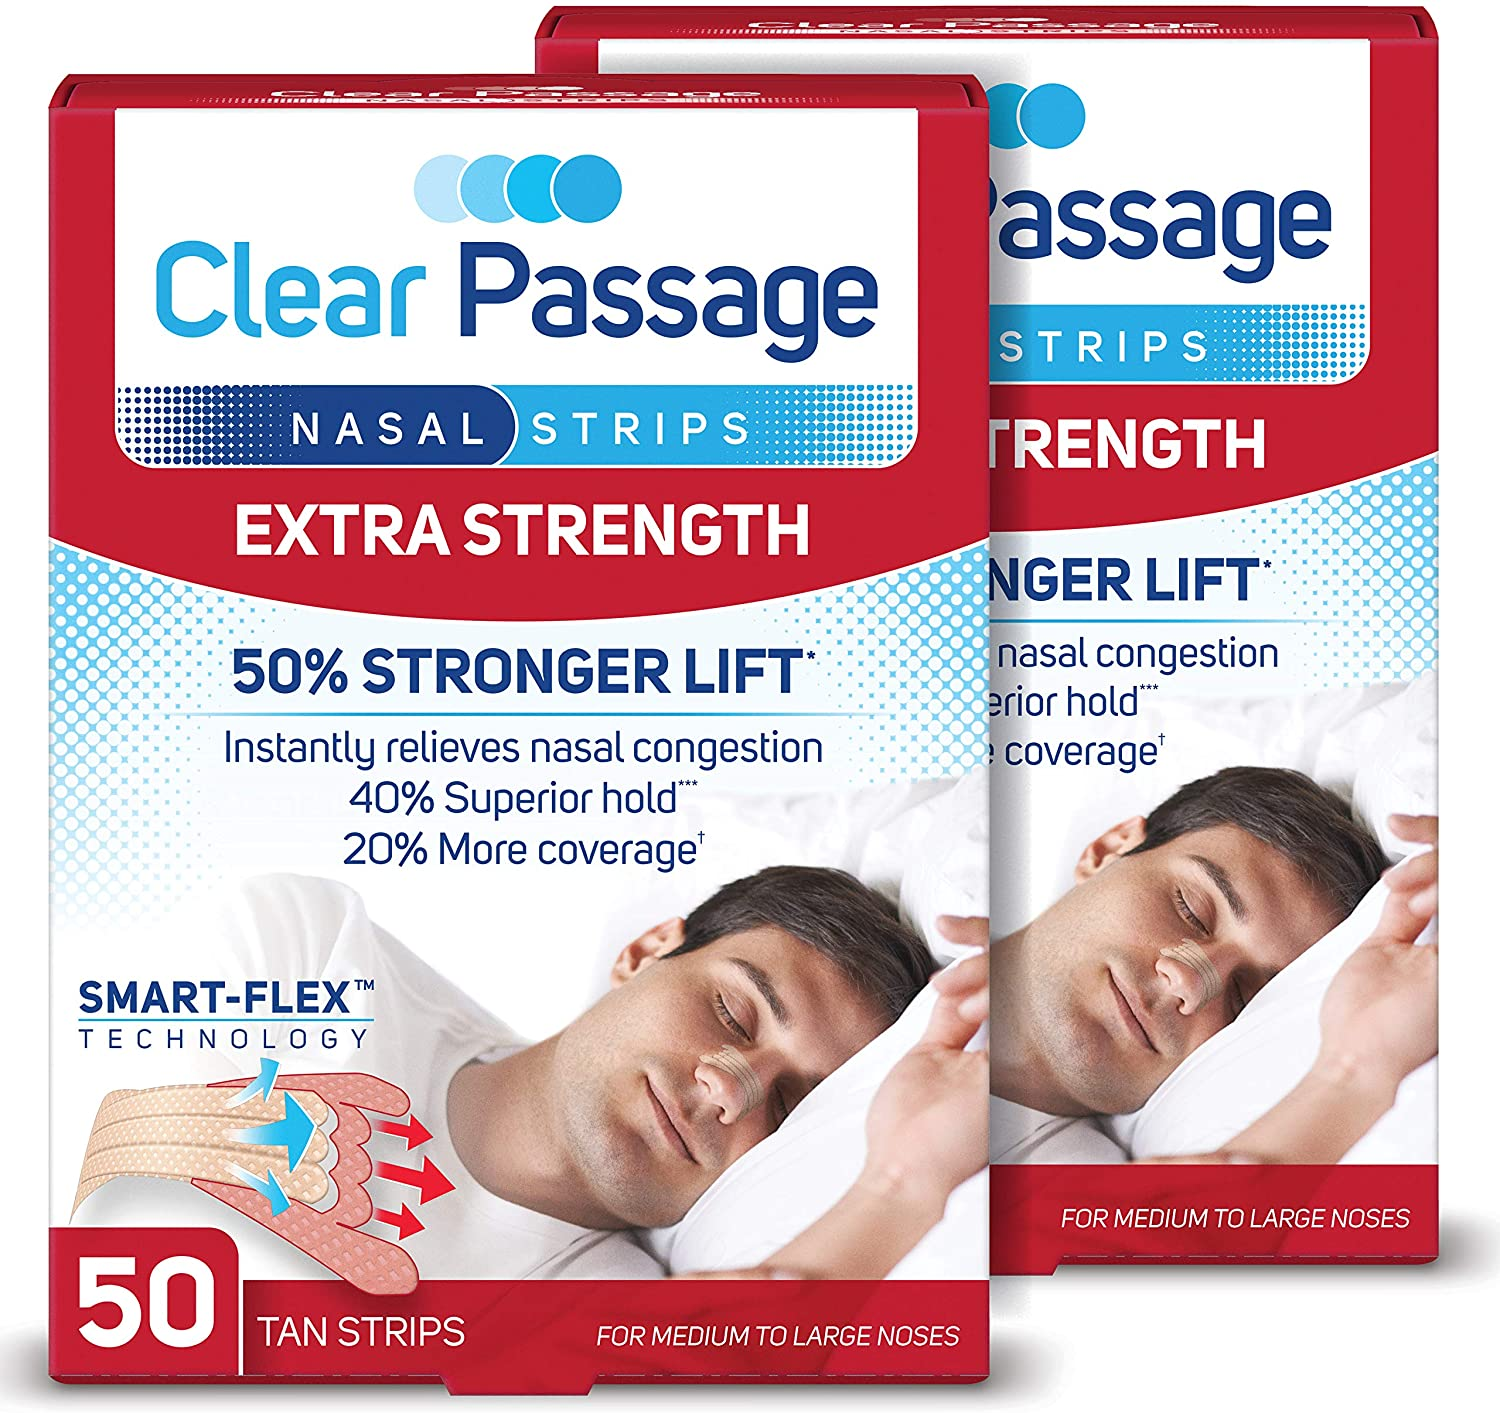 Clear Passage Nasal Strips Extra Strength, Tan, 50 Count | Works Instantly to Improve Sleep, Reduce Snoring, & Relieve Nasal Congestion Due to Colds & Allergies